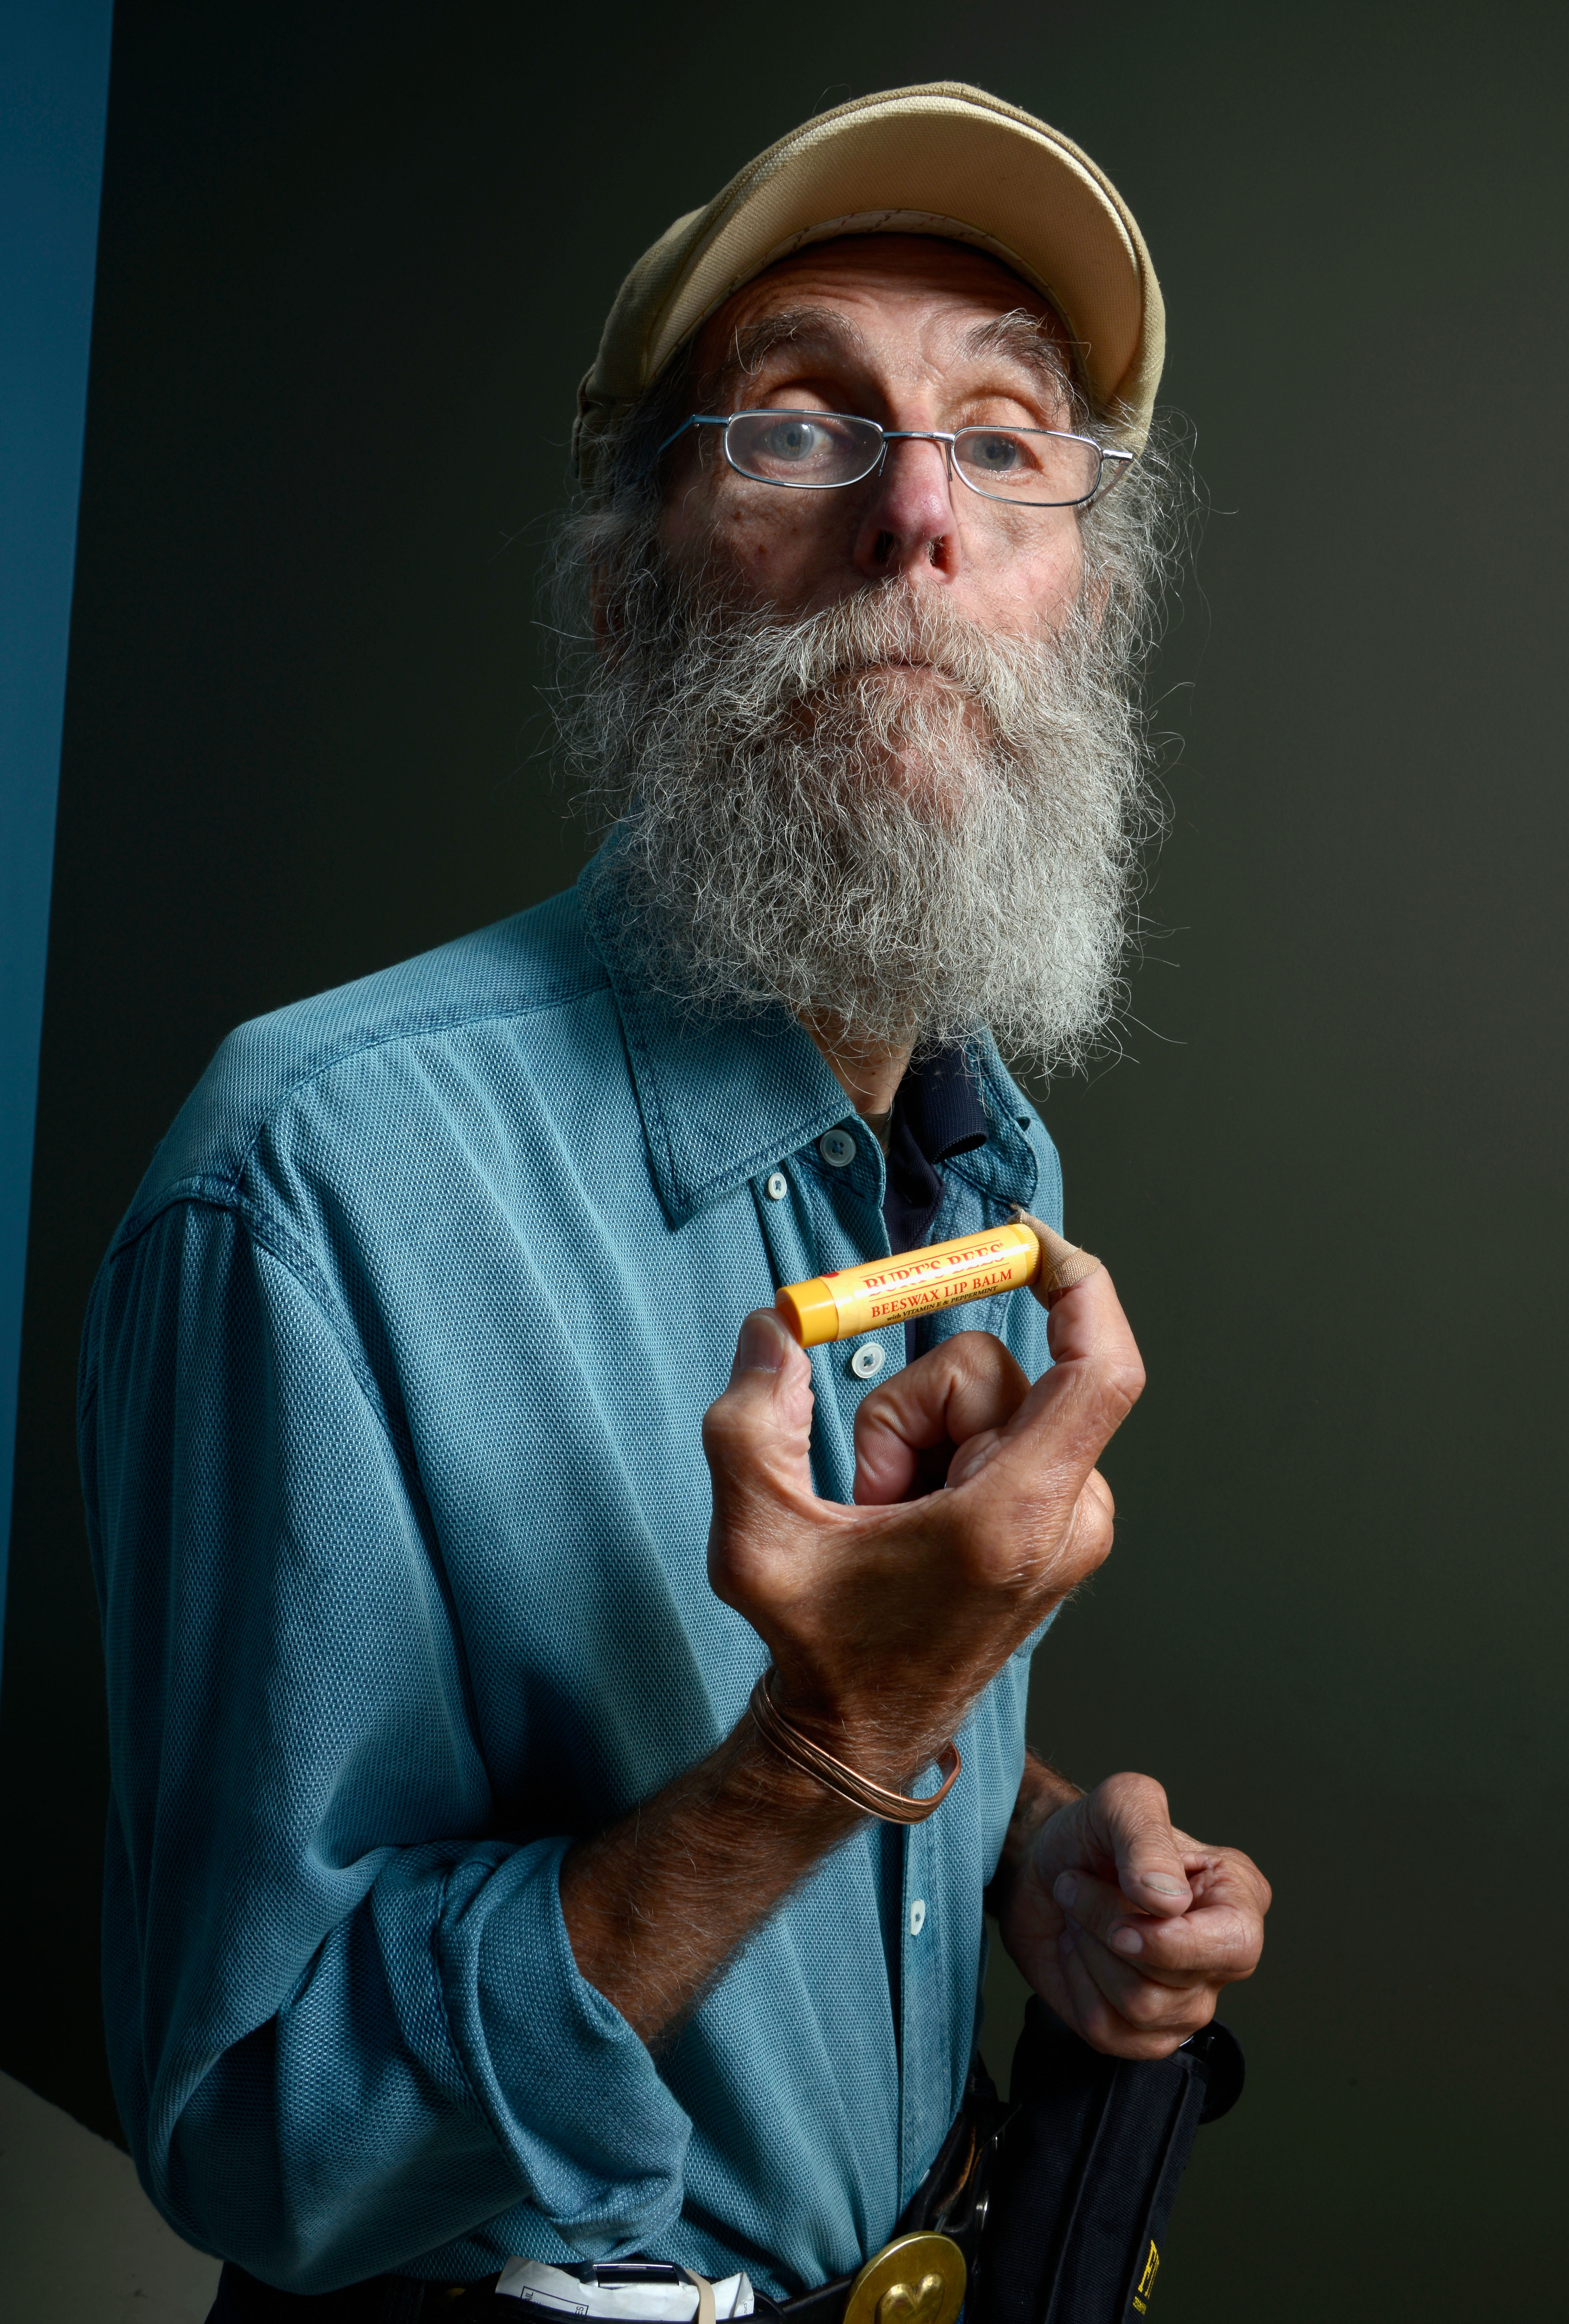 Burt Shavitz of 'Burt's Bees' on September 8, 2013 in Toronto, Canada. (Photo by Larry Busacca/Getty Images)